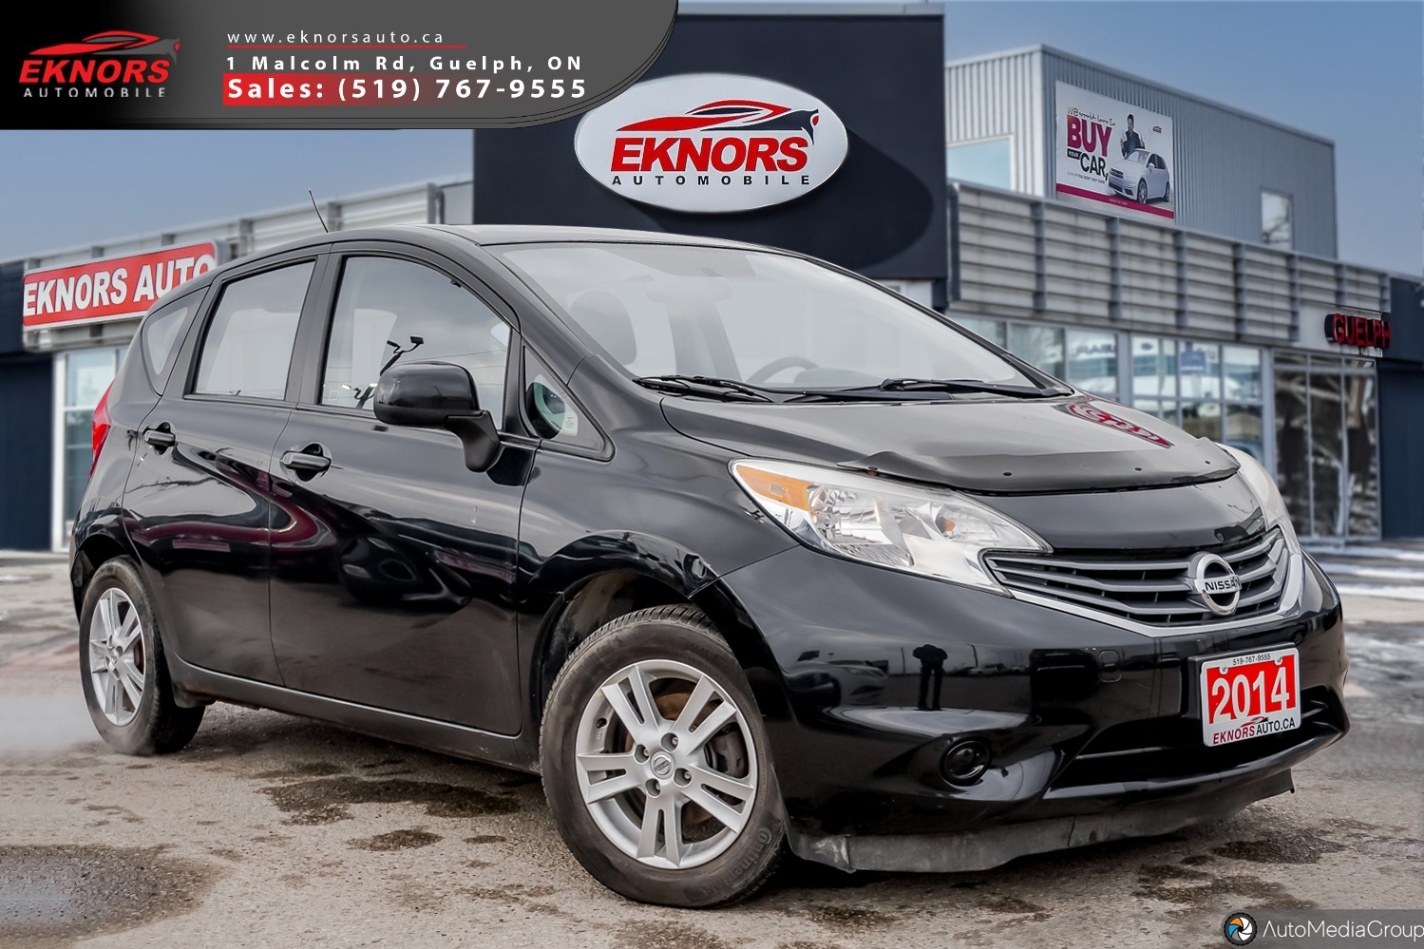 2014 Nissan Versa Note 5dr HB 1.6. LOW KM, CHEAP TO MAINTAIN AND GAS SAVE